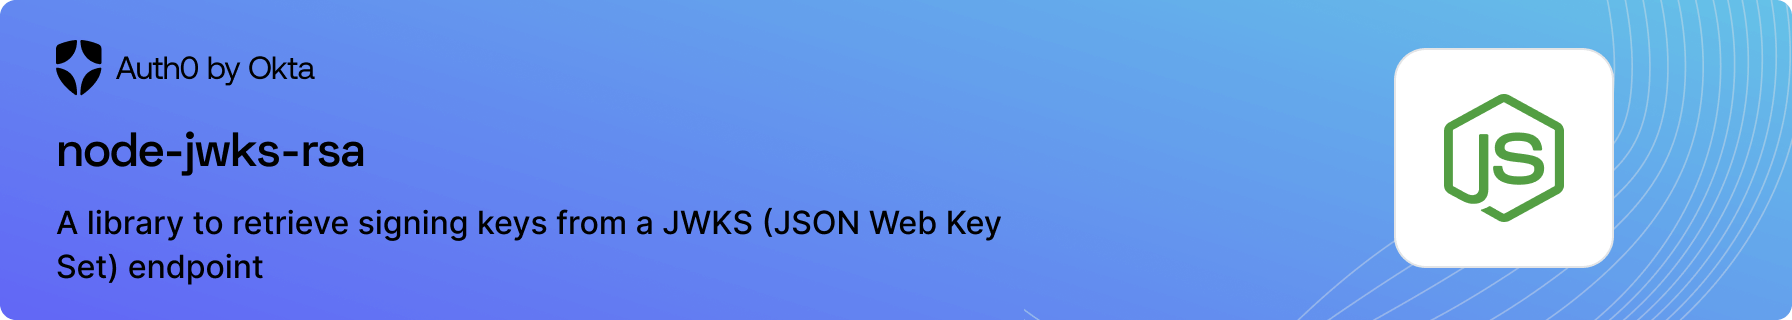 A library to retrieve signing keys from a JWKS (JSON Web Key Set) endpoint.